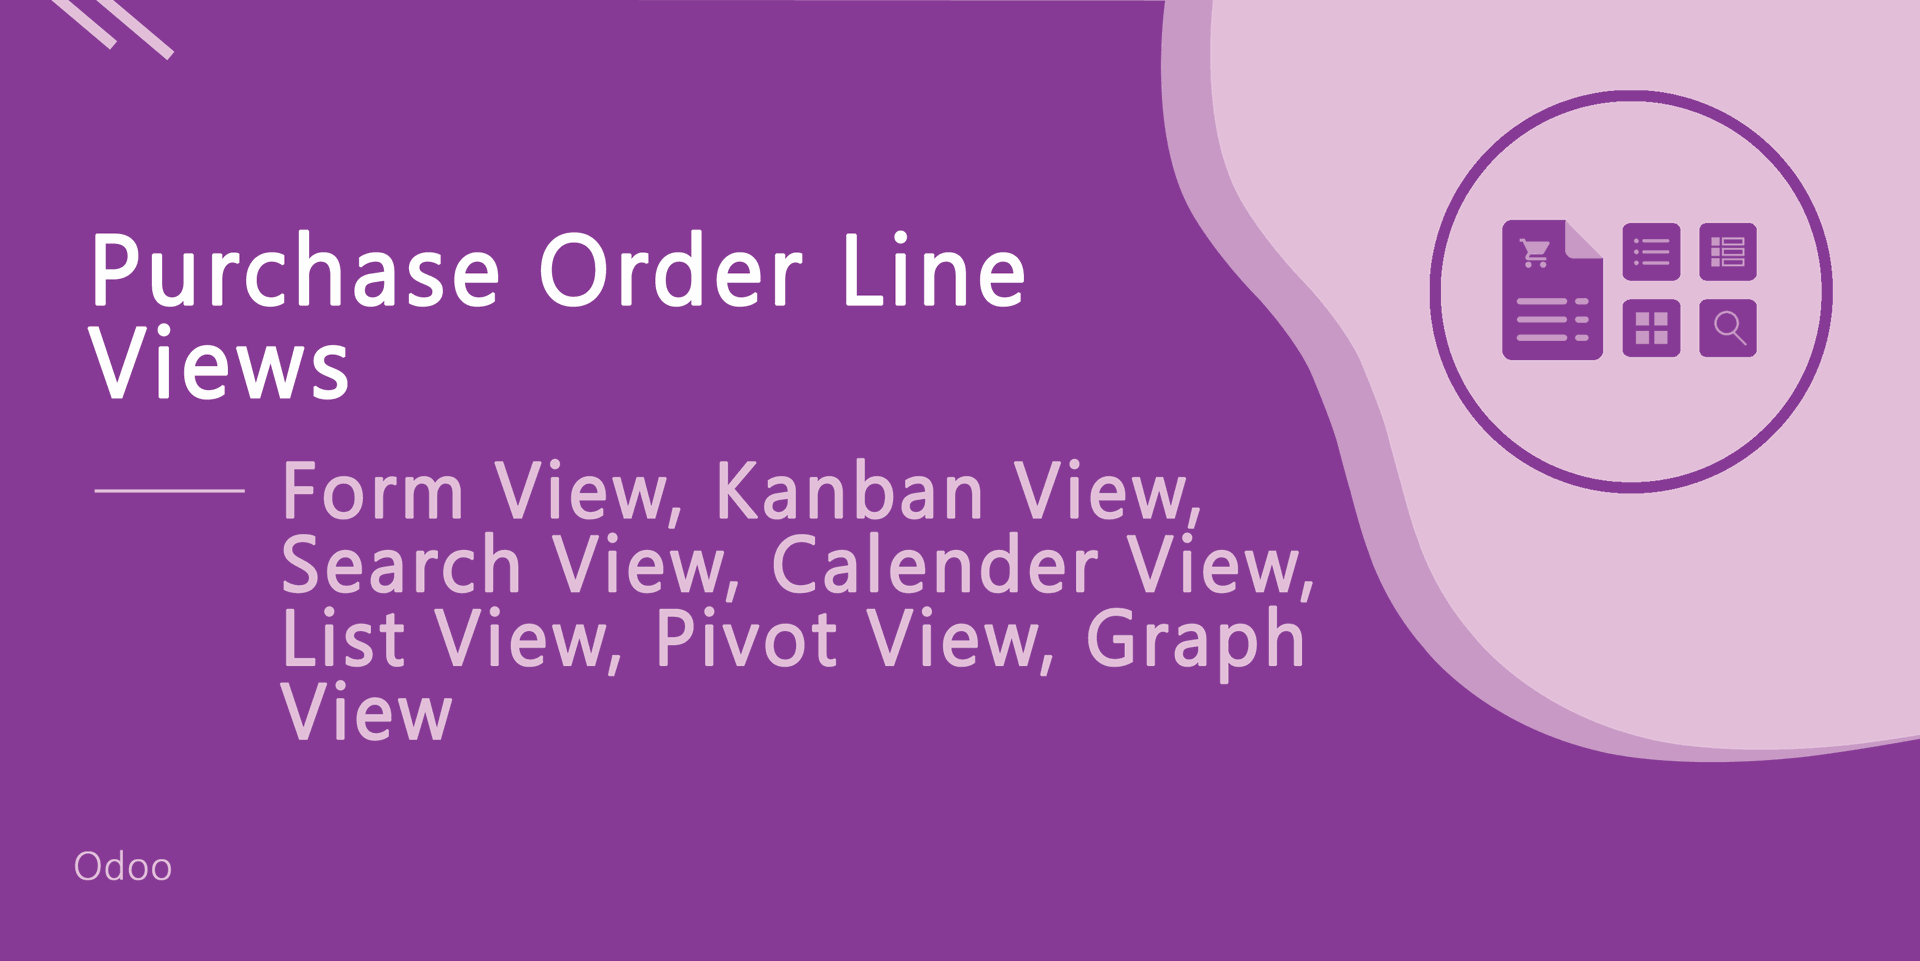 Purchase Order Line Views